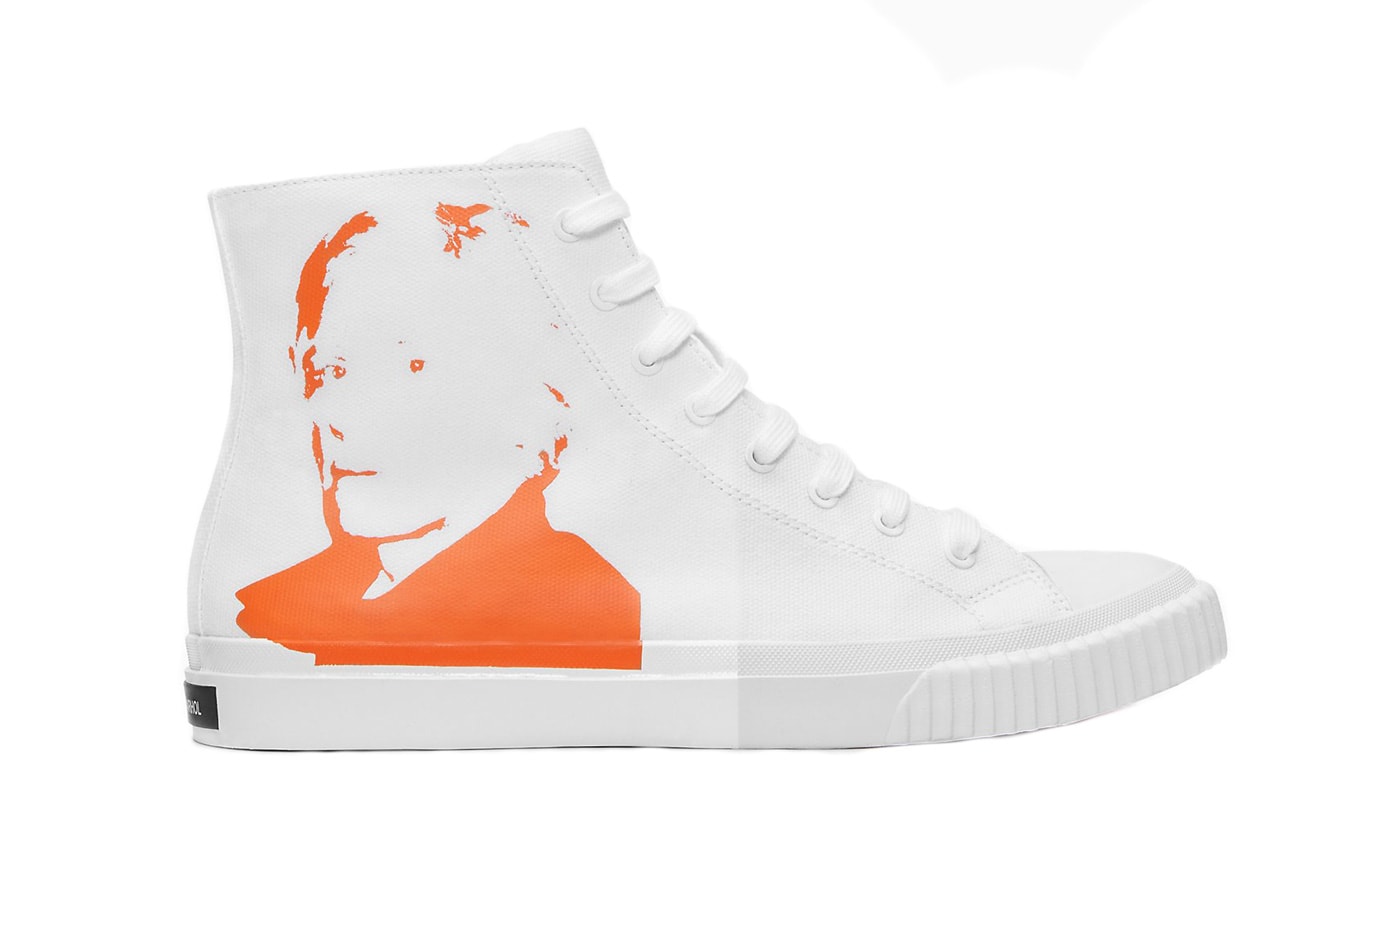 Calvin Klein Andy Warhol Portrait Canvas Sneakers Pre-Order Art drop release date info buy july 18 2018 available web store